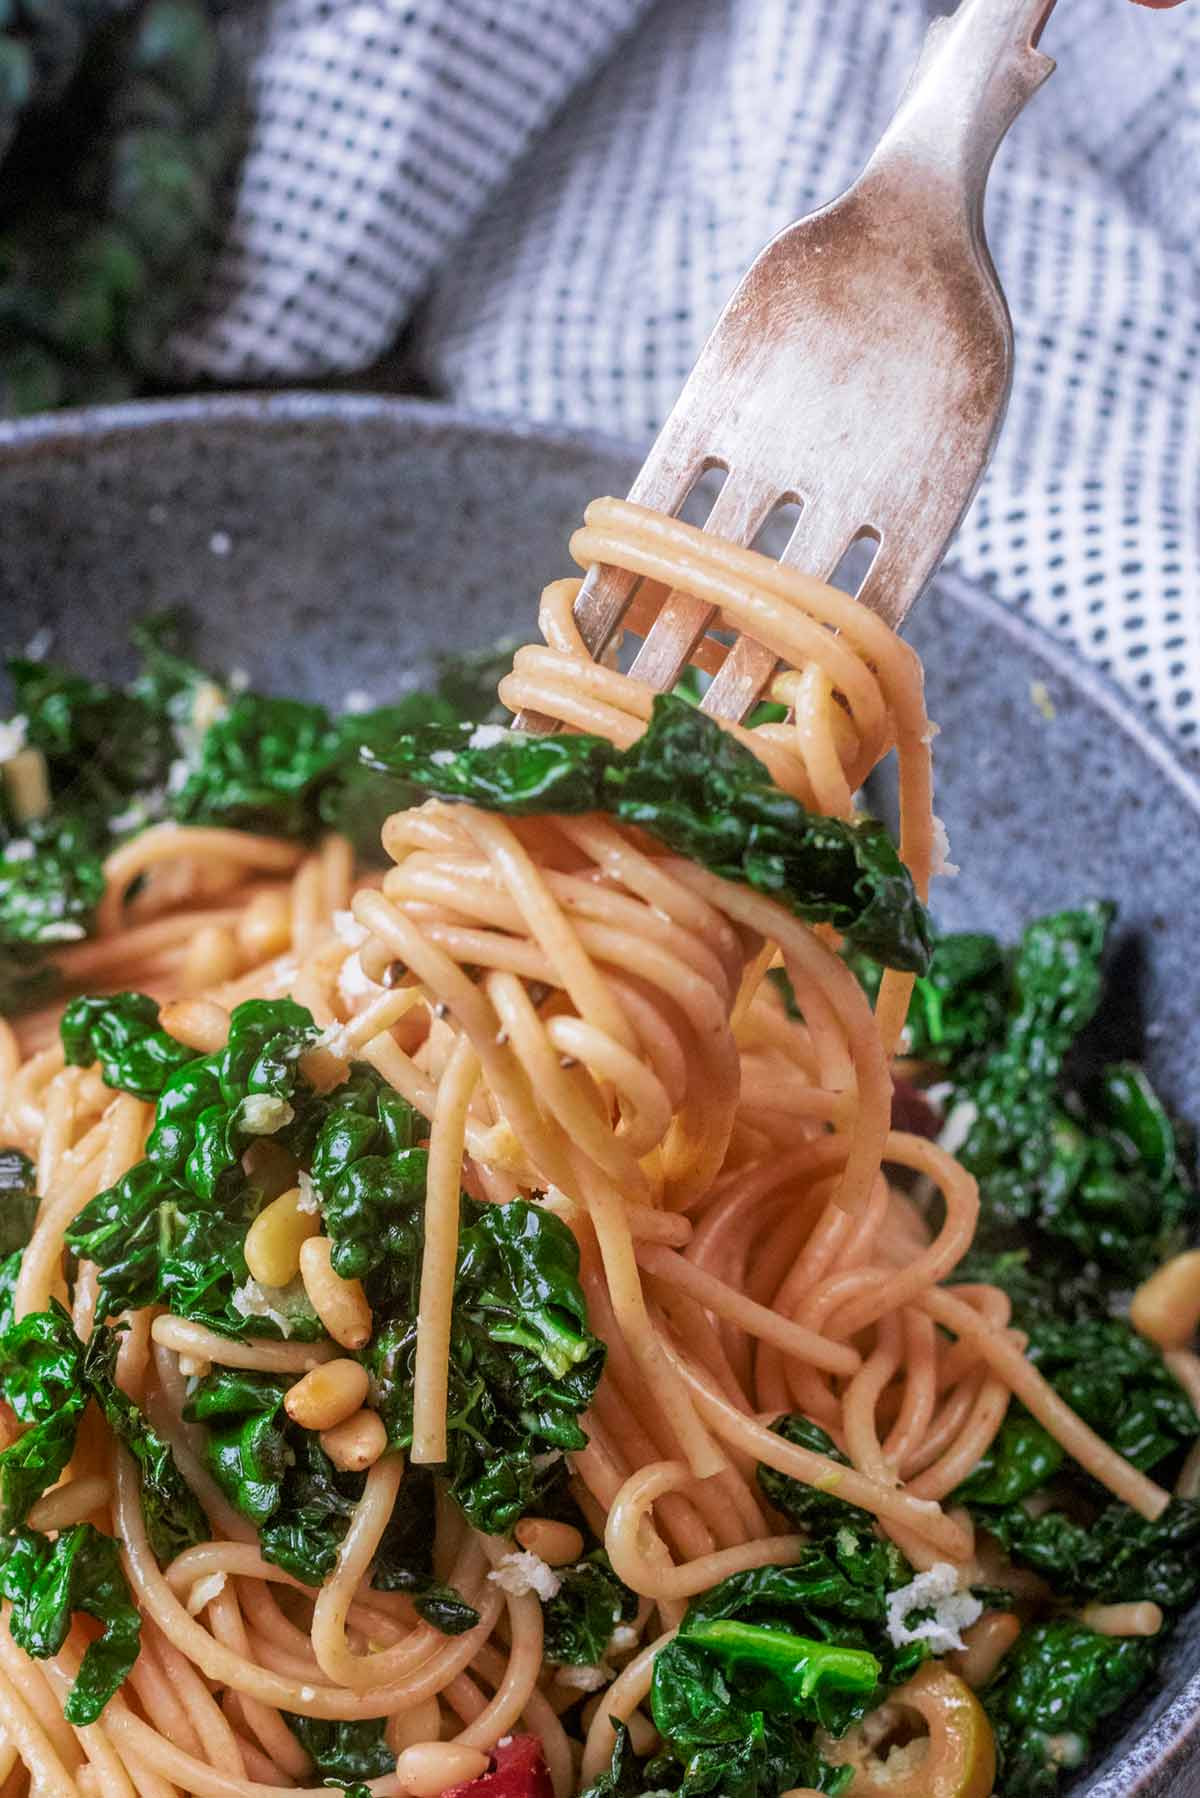 A fork lifting some cooked spaghetti and cavolo nero from a bowl.